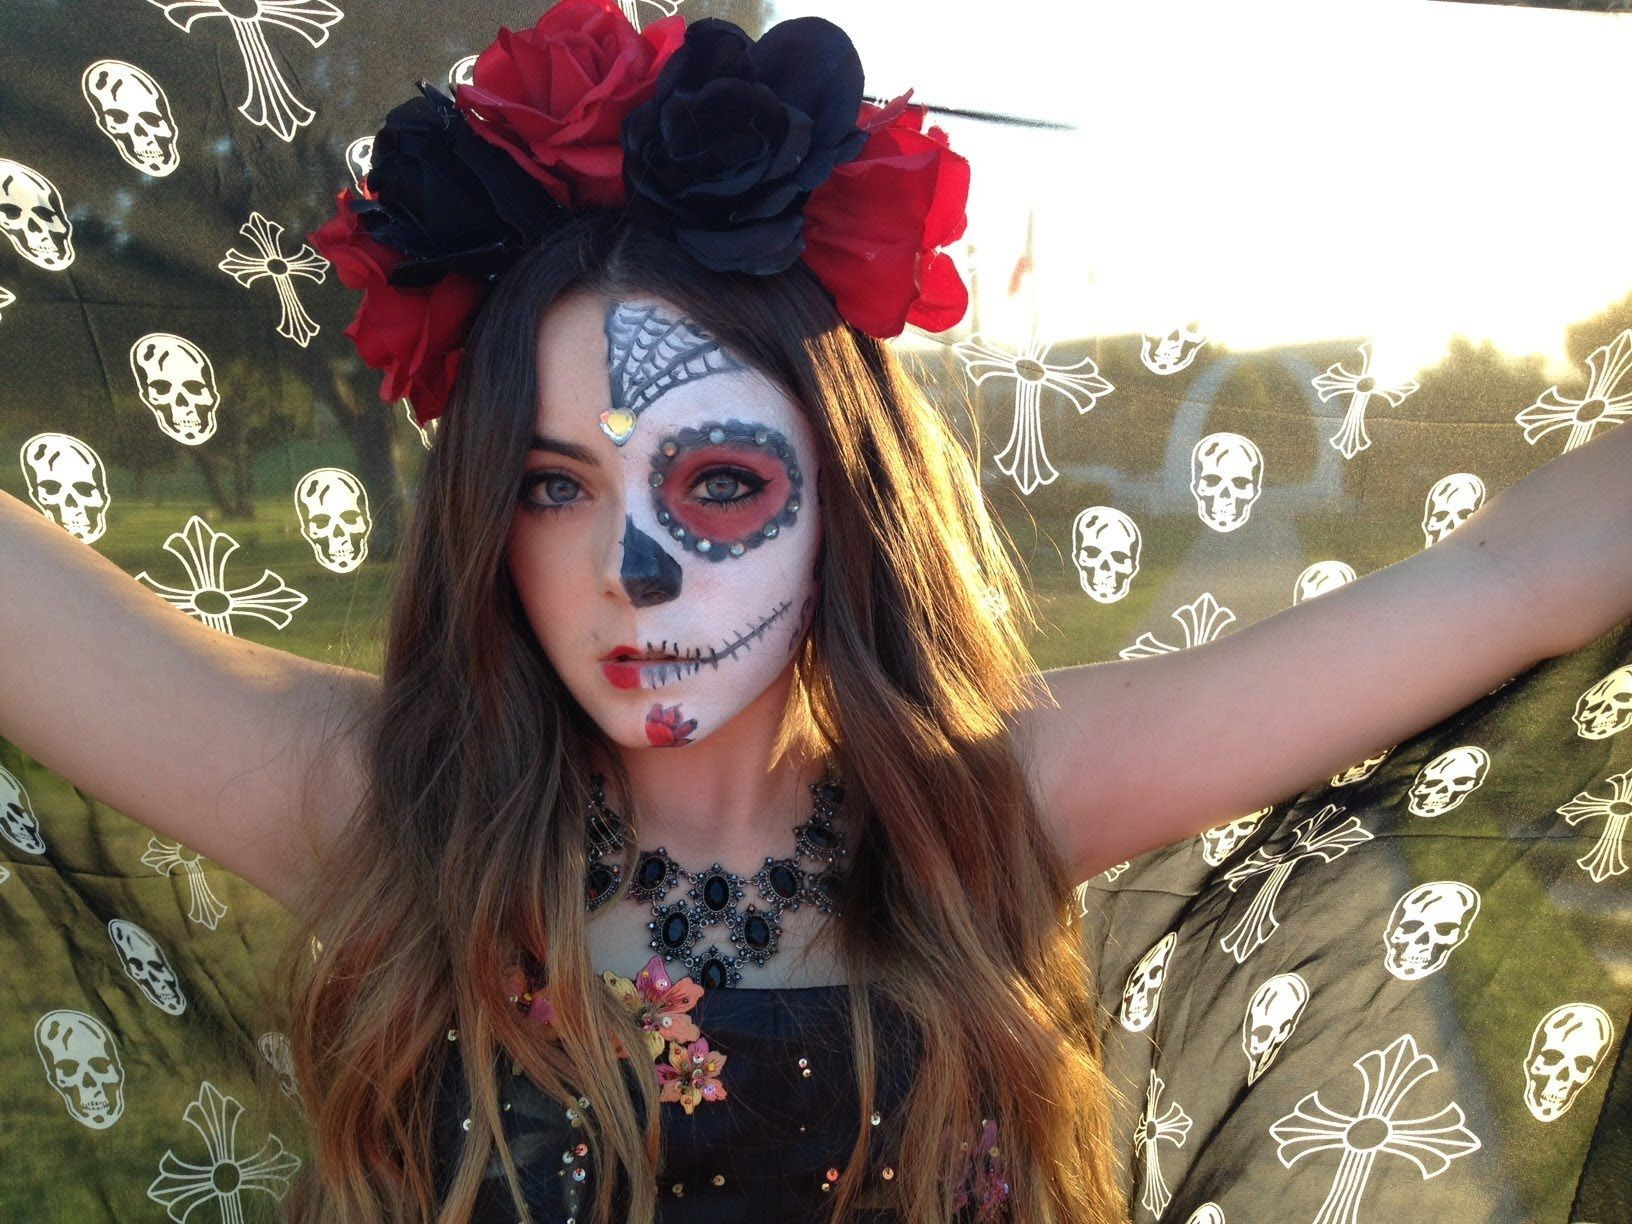 Sugar Skull Costume DIY
 Today I am going to show you how to transform yourself